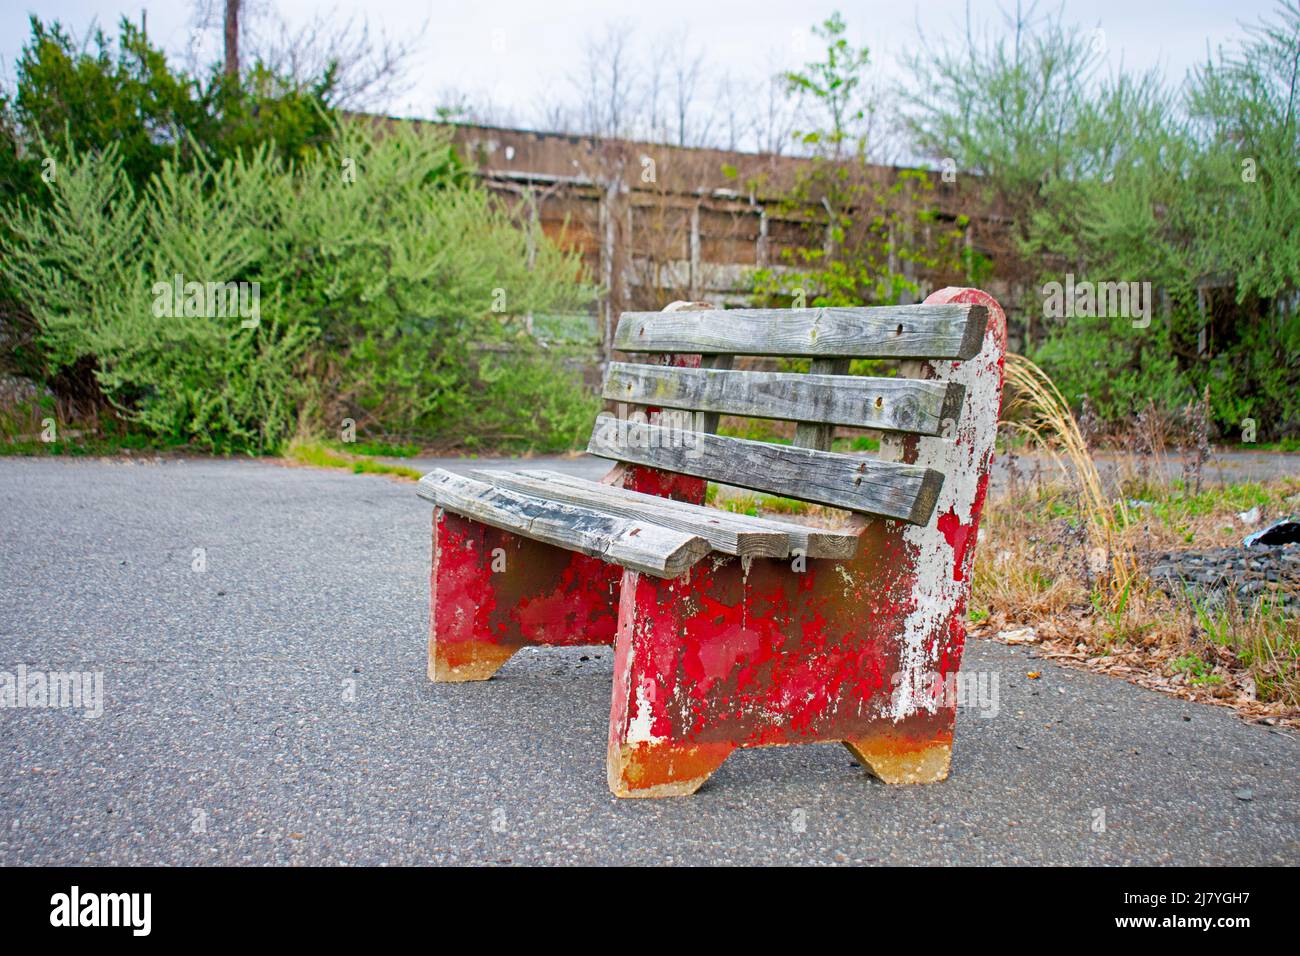 Worn out red and gray wooden bench on the edge of a gravel roadway with an abandoned building in the background Stock Photo